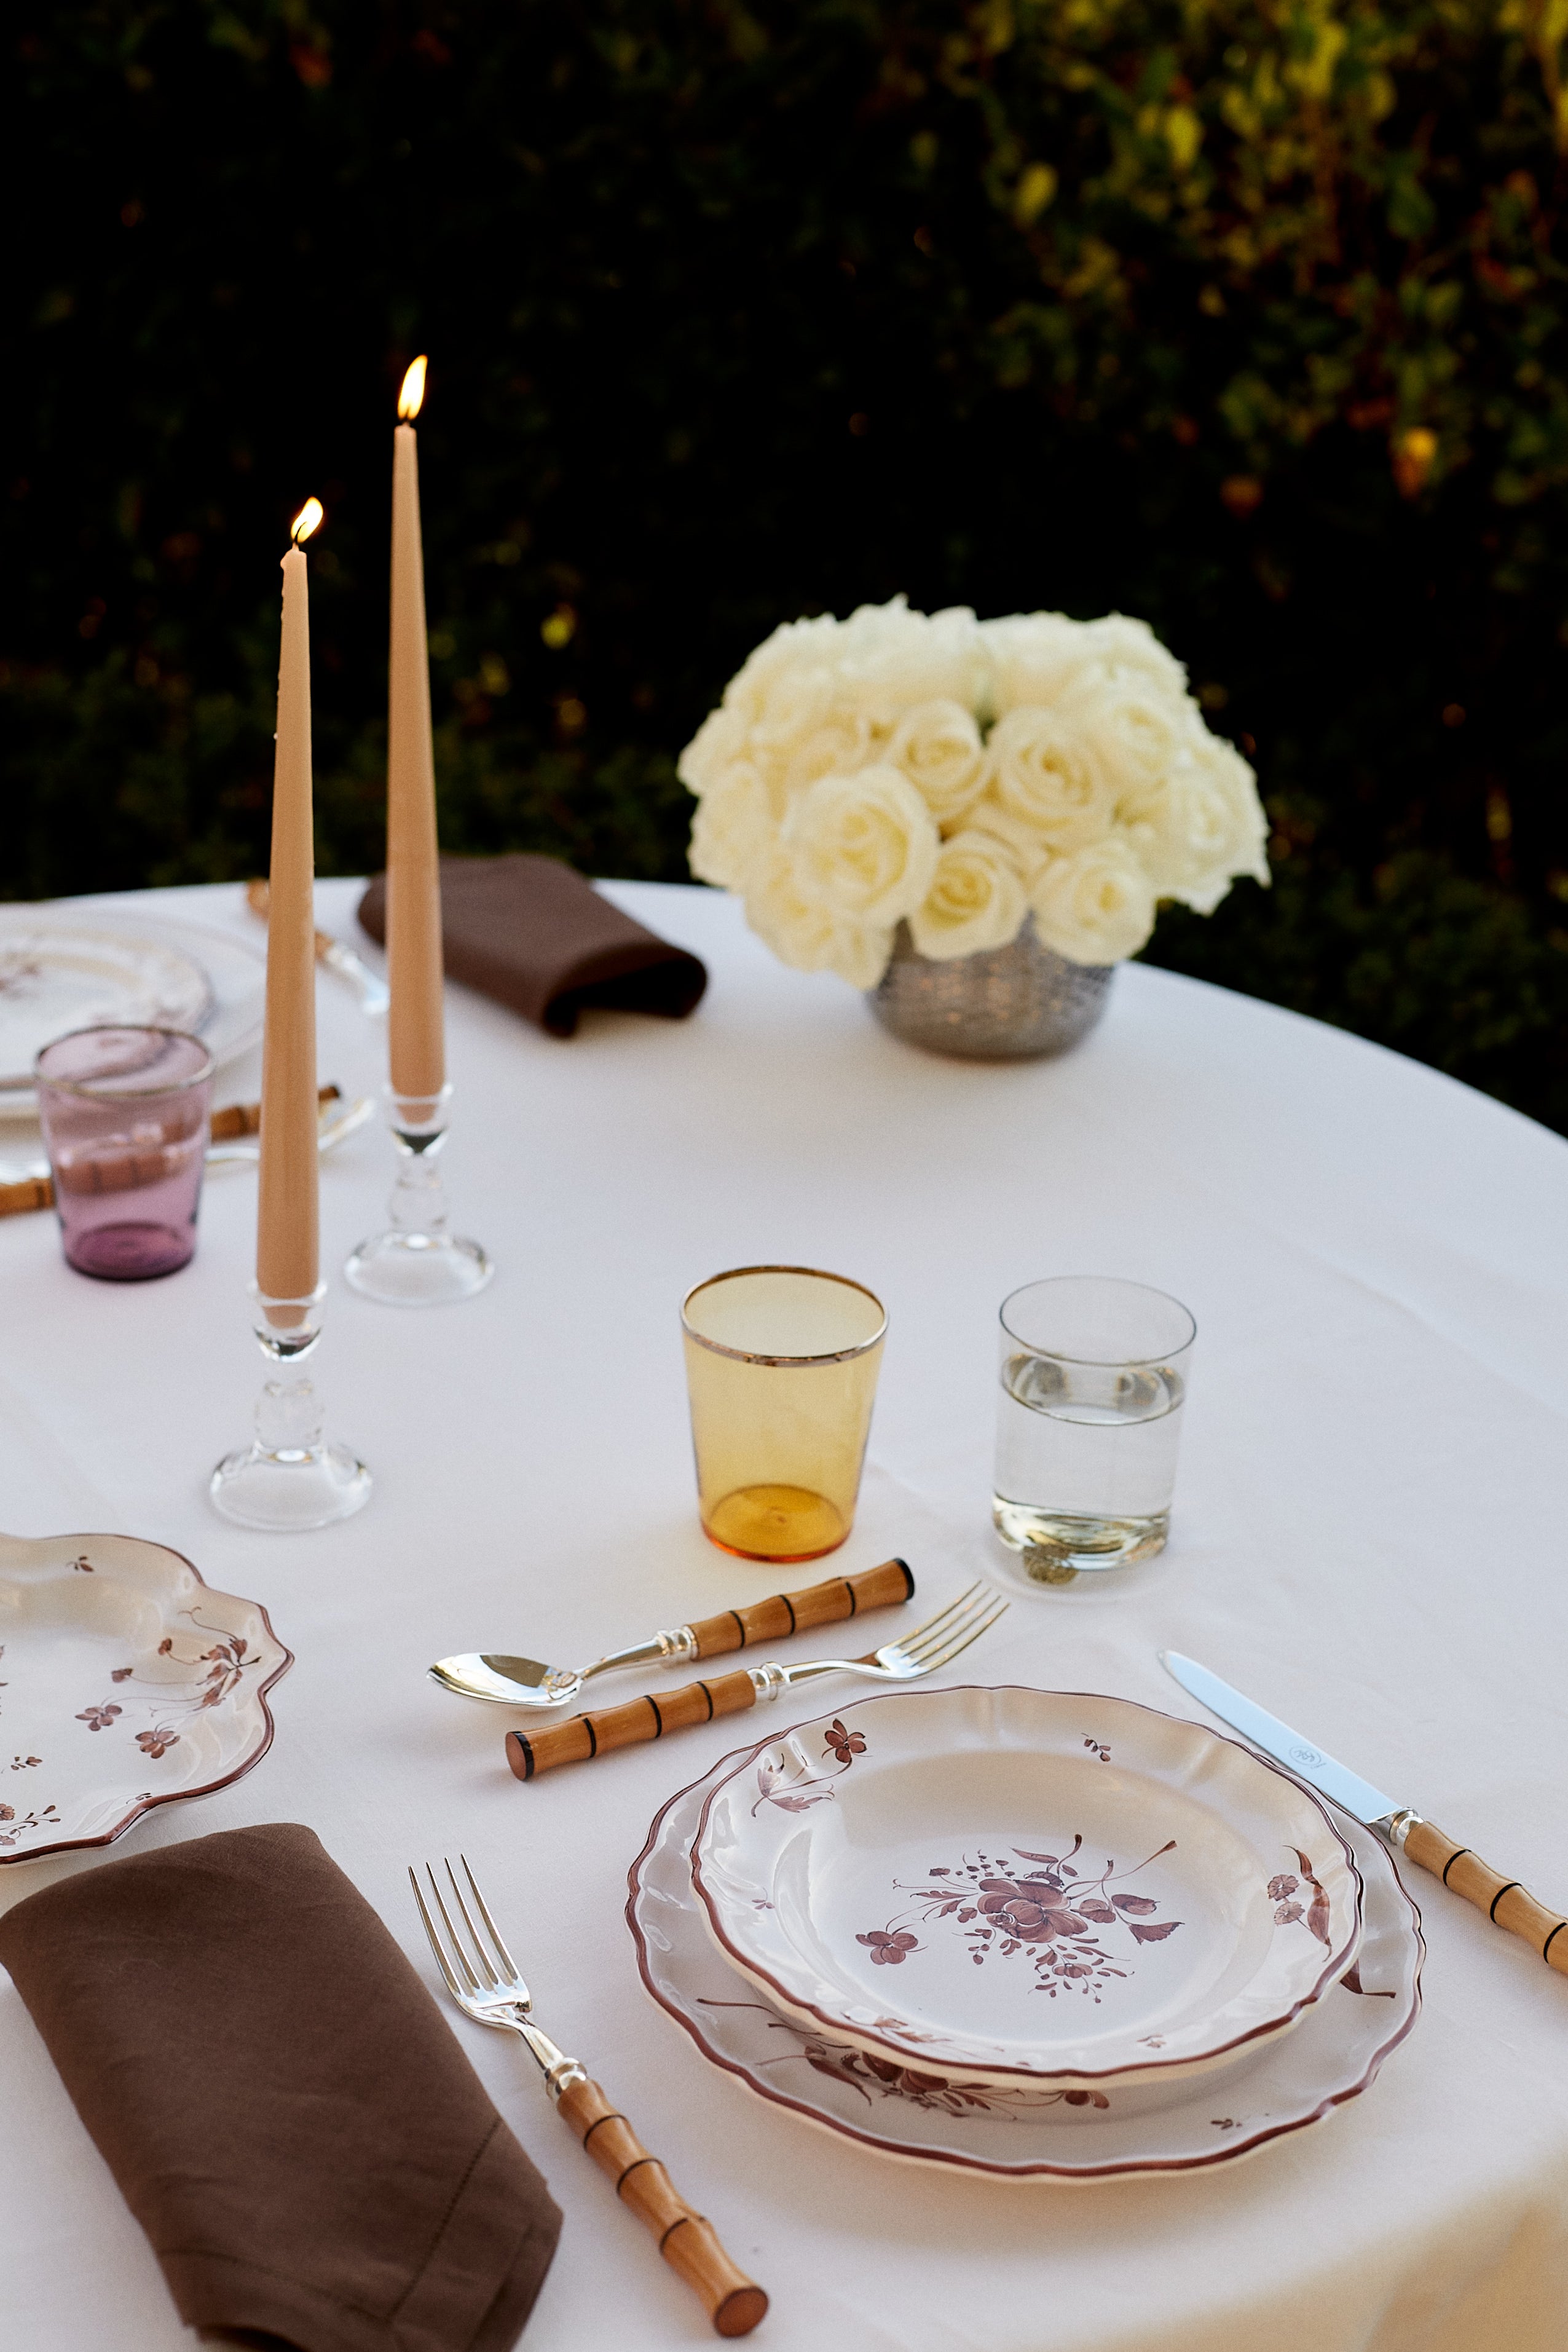 styled table setting with Camaïeu Dinner Plate, Chocolat